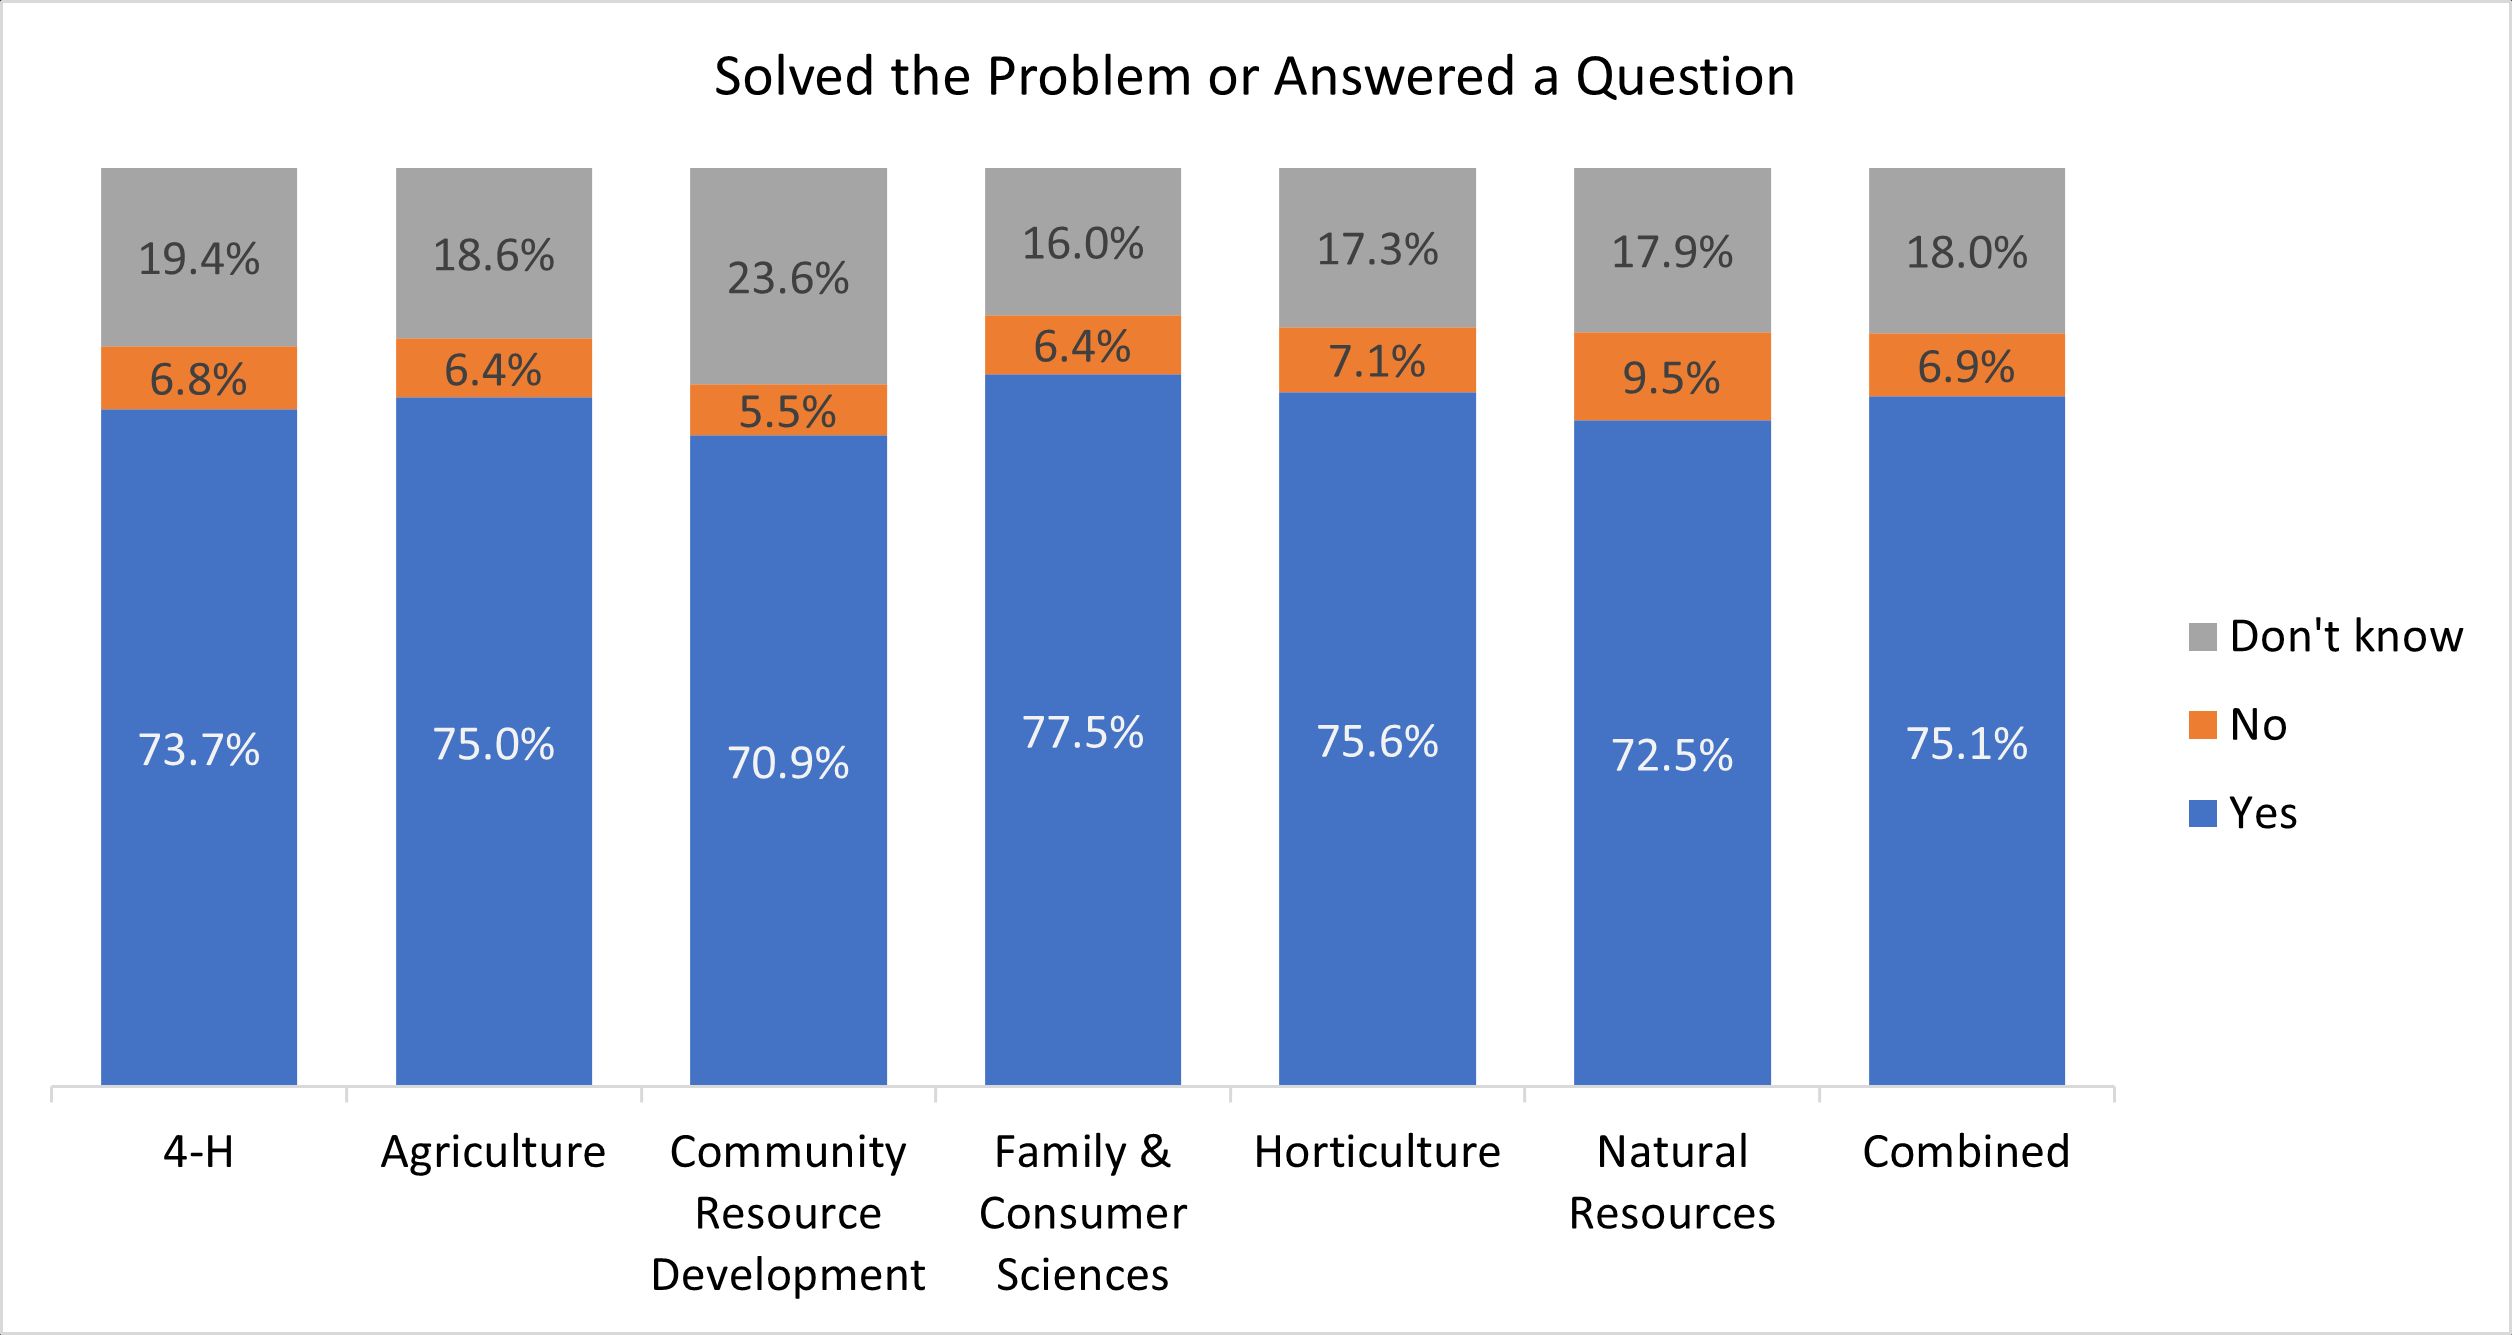 The majority of Extension clients are satisfied that the information they received solved or answered their question.